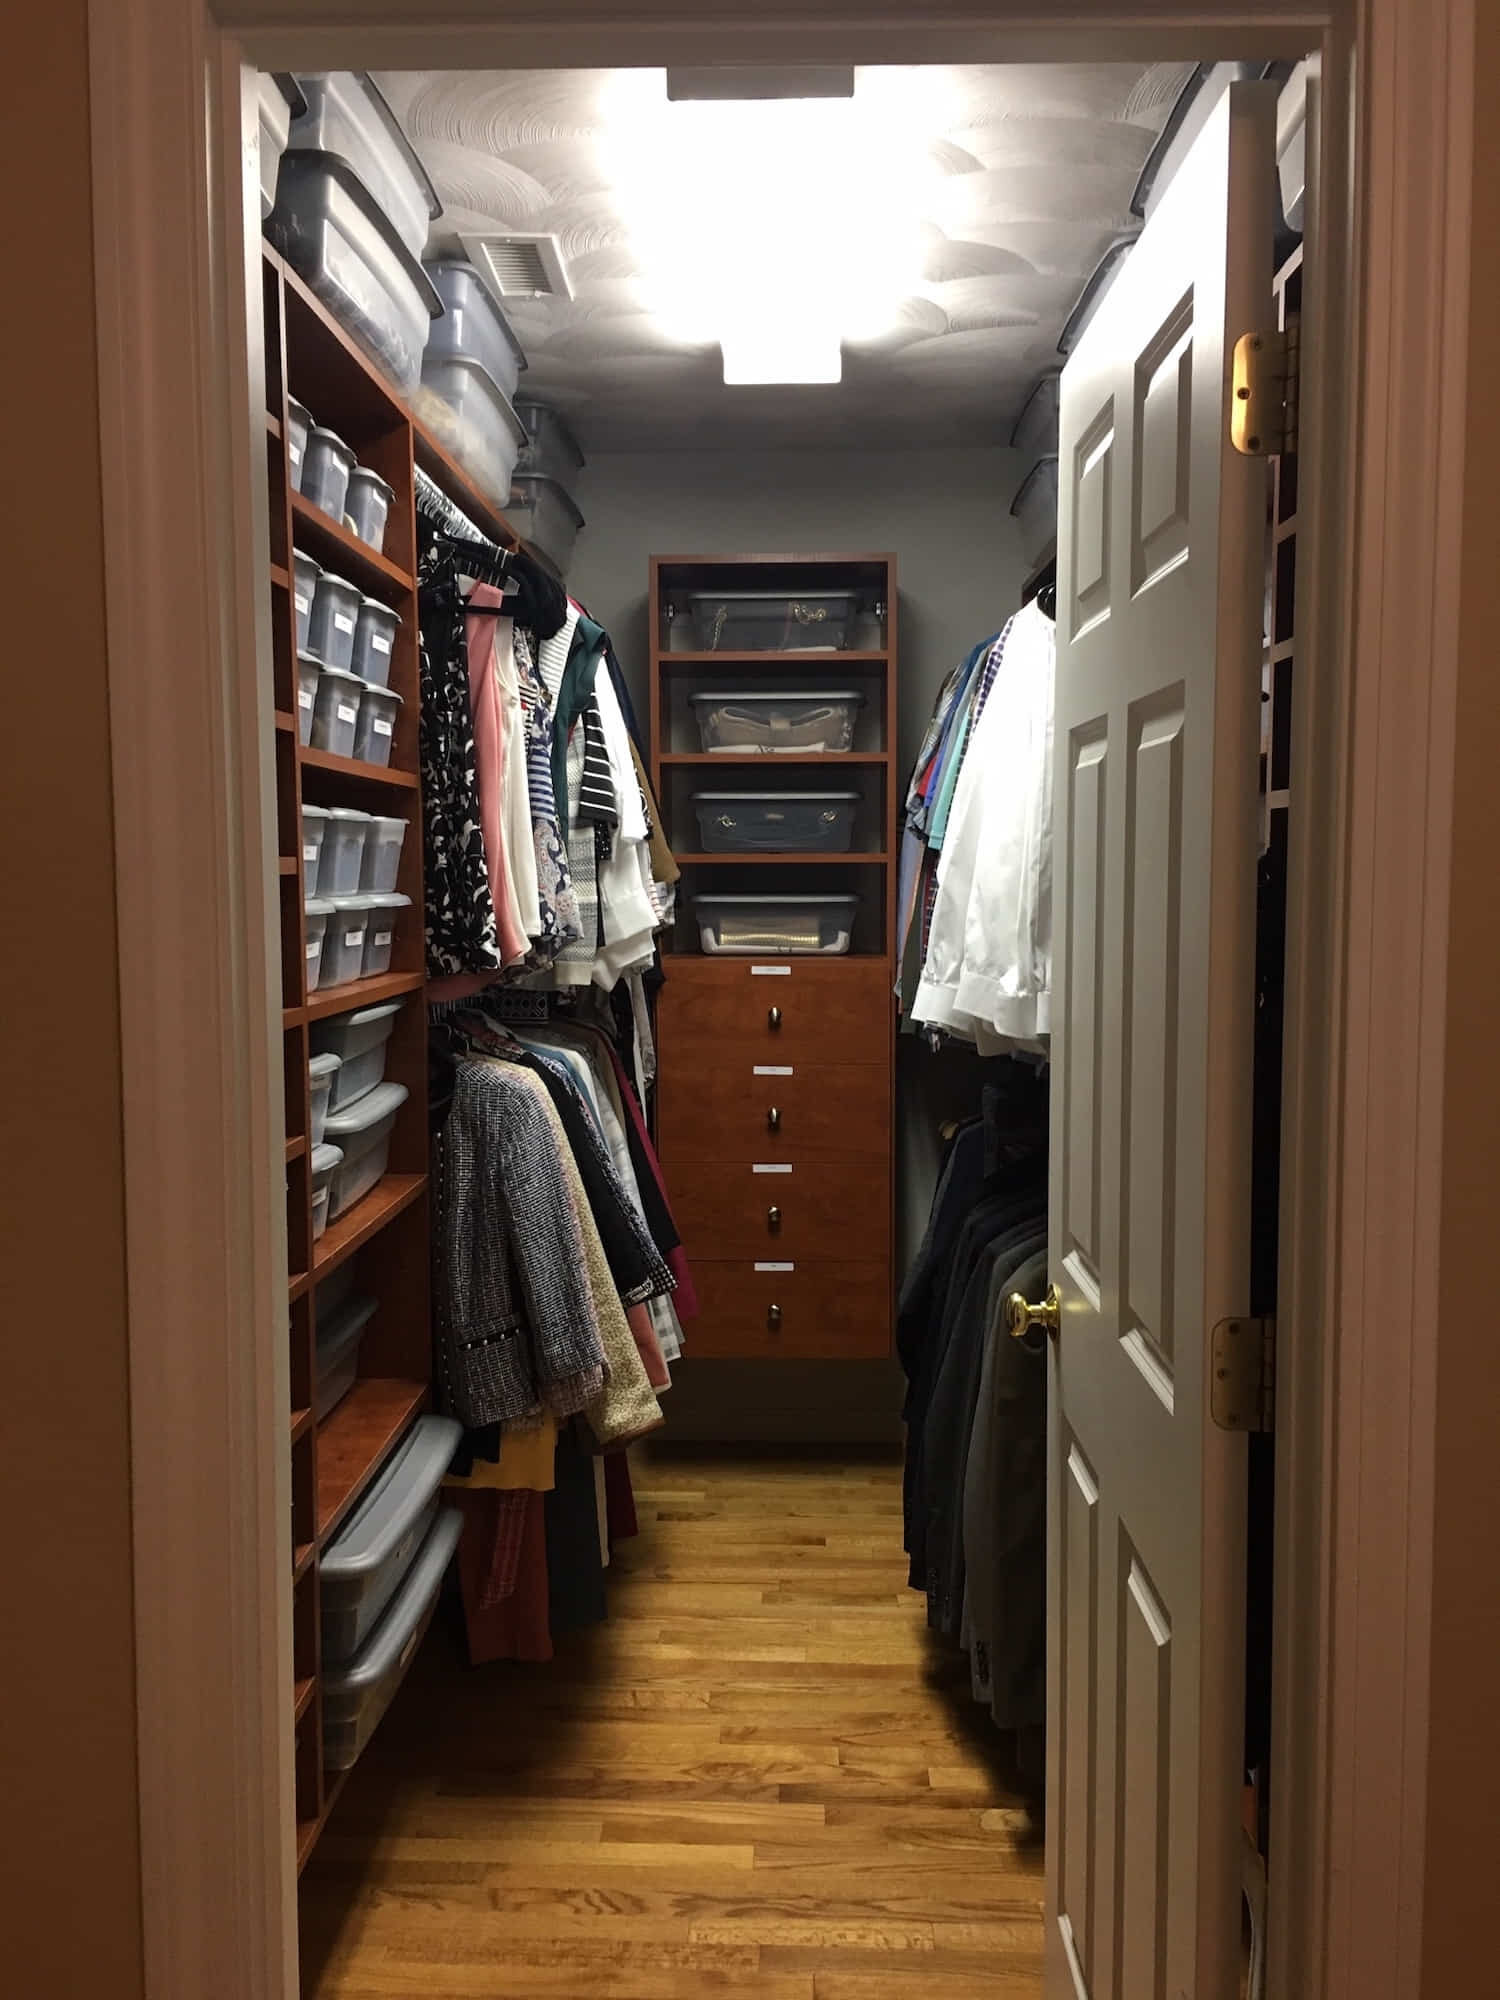 Walk-in Closet:  After